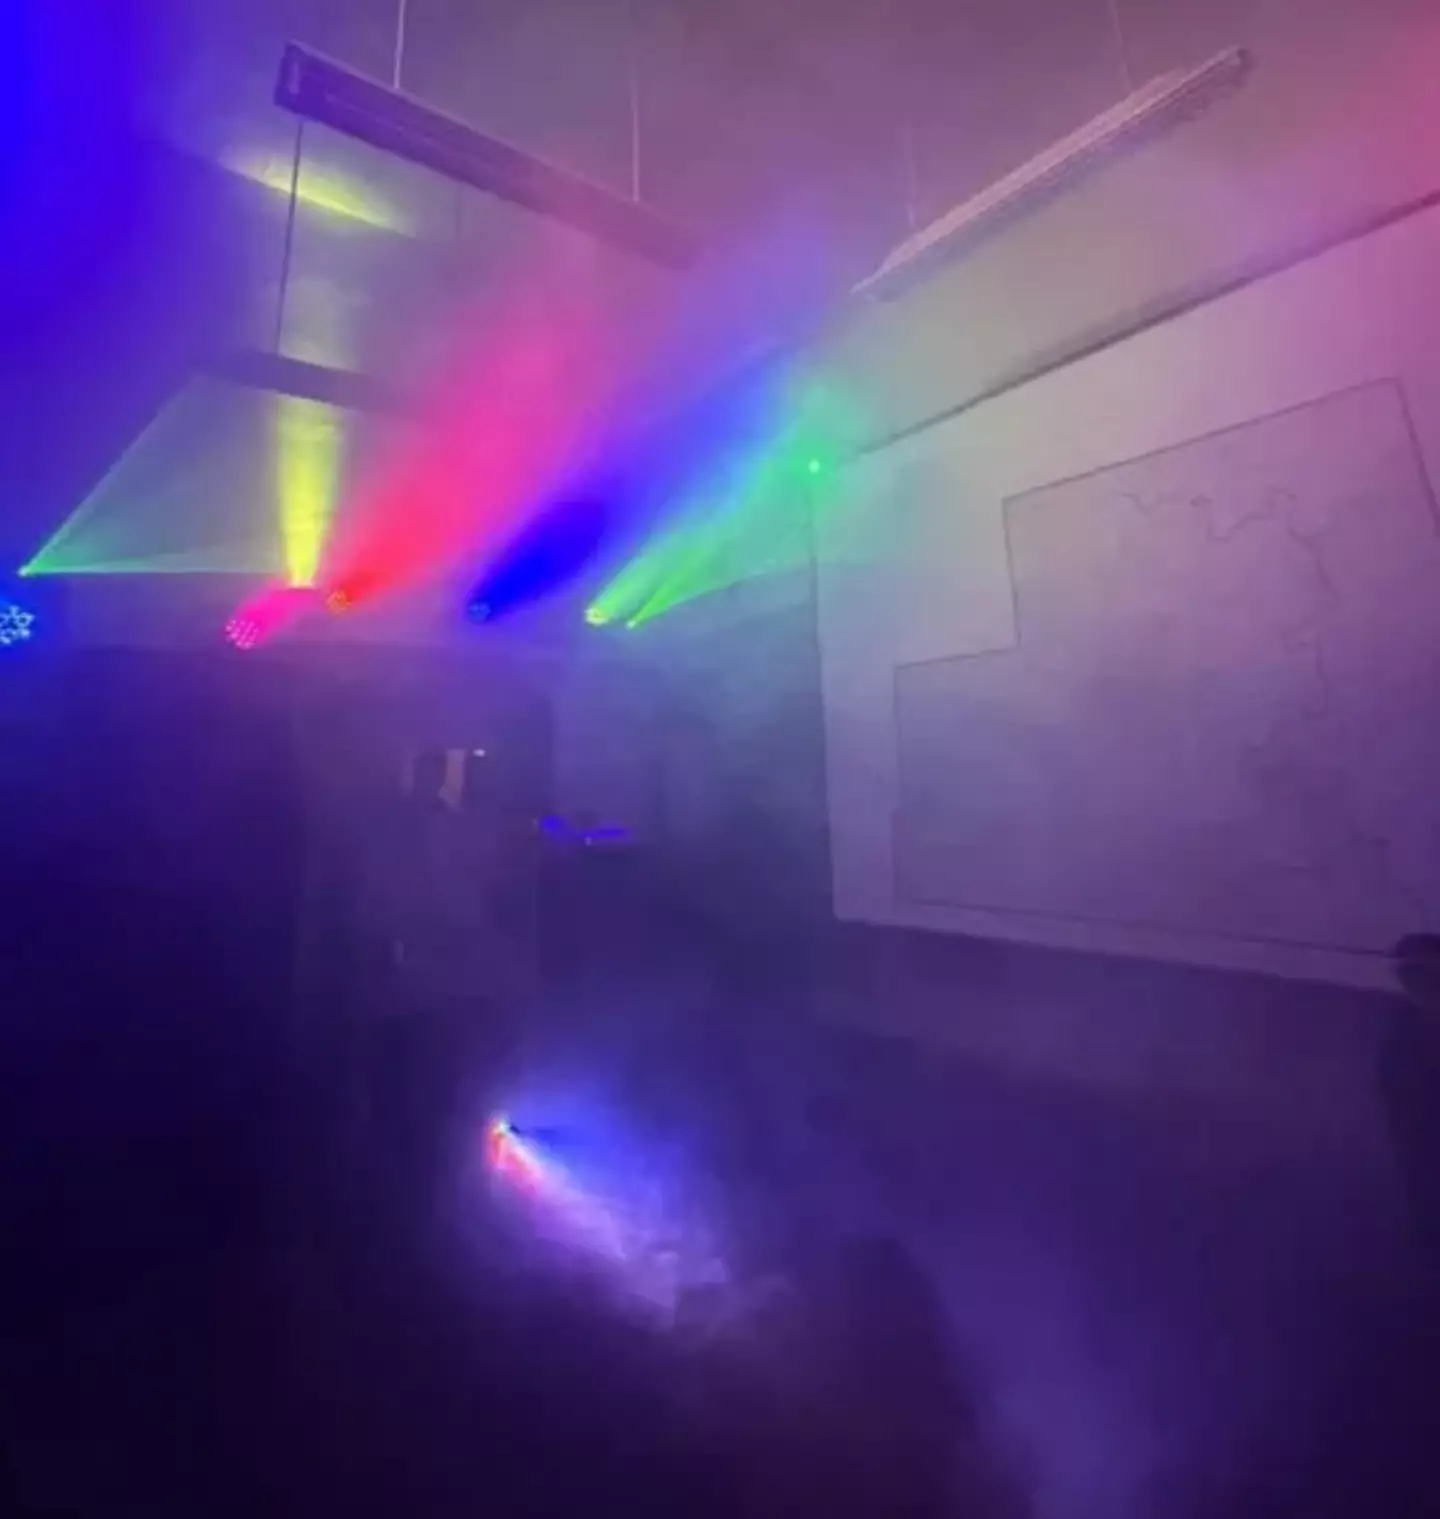 The bunker was being used for a rave.